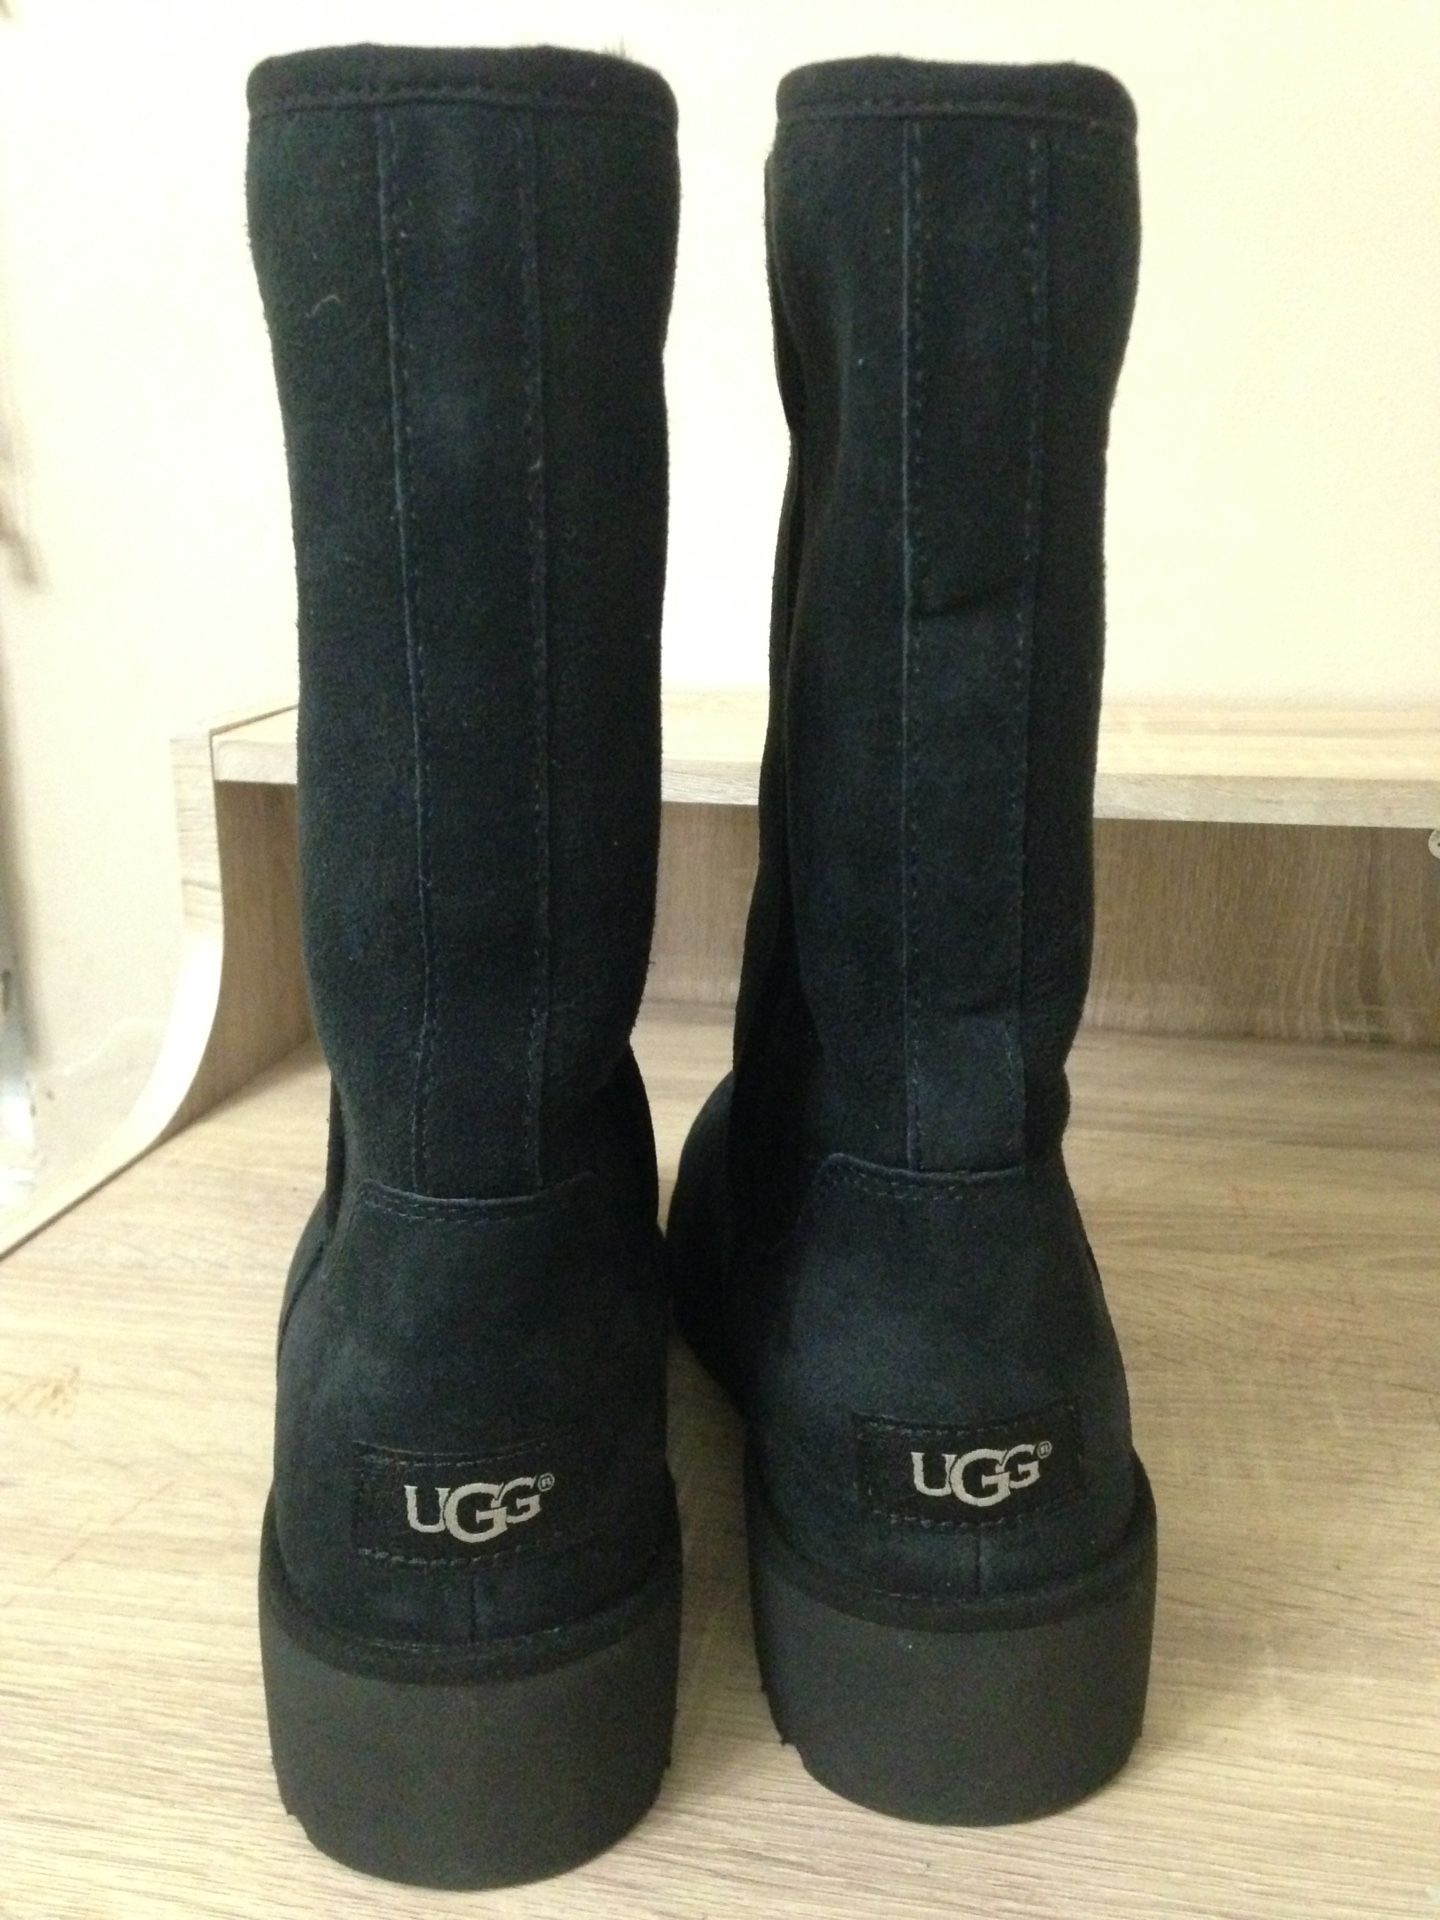 UGG Amie 8.5 Women's Boots